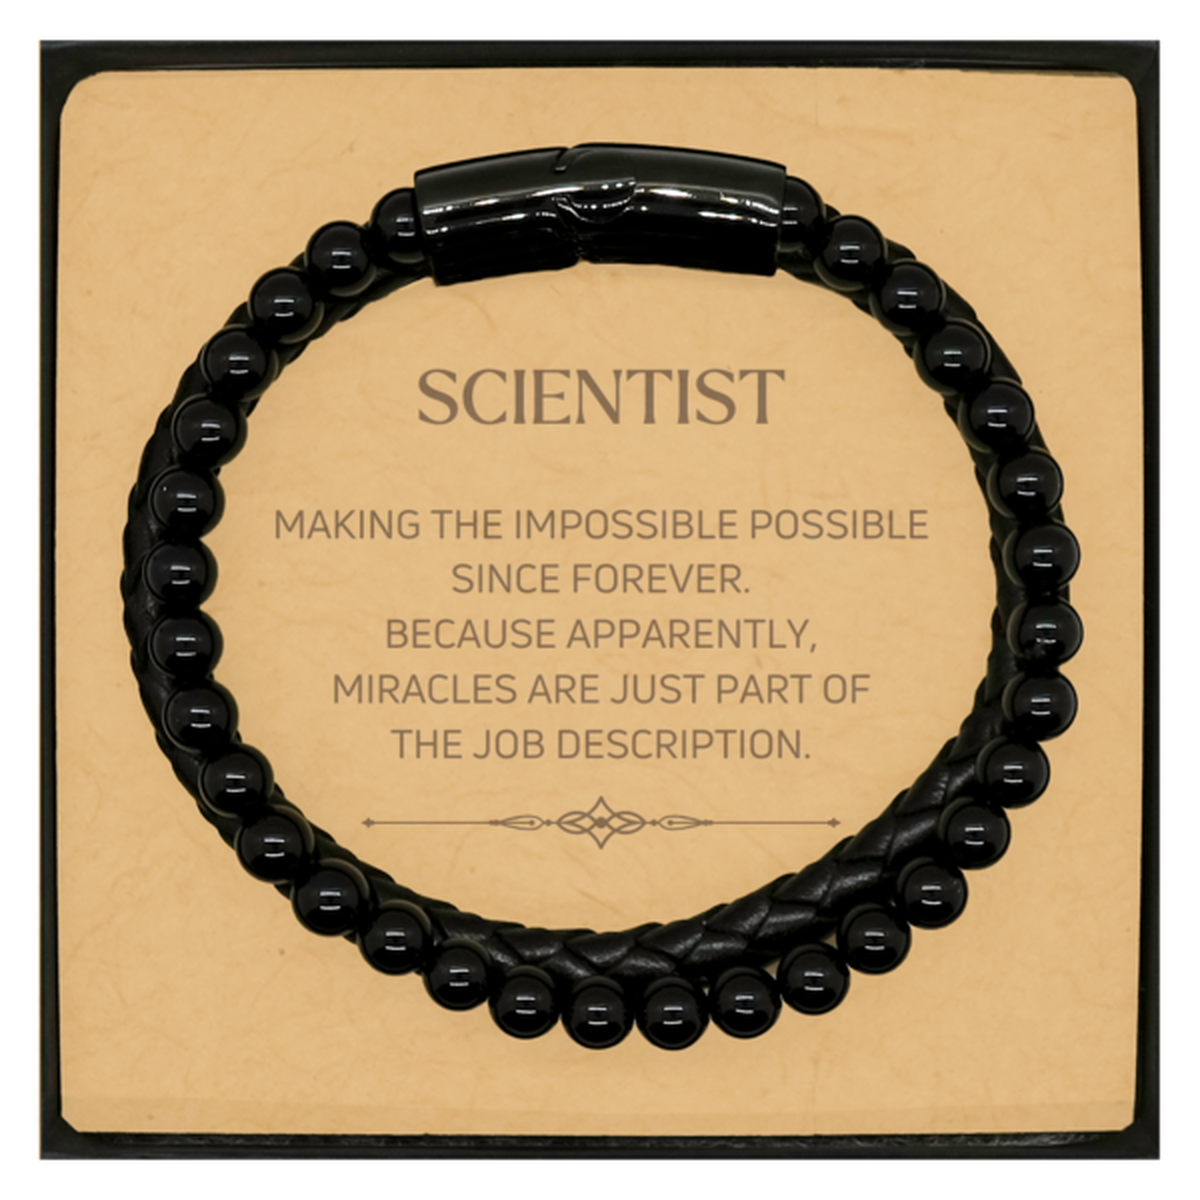 Funny Scientist Gifts, Miracles are just part of the job description, Inspirational Birthday Christmas Stone Leather Bracelets For Scientist, Men, Women, Coworkers, Friends, Boss